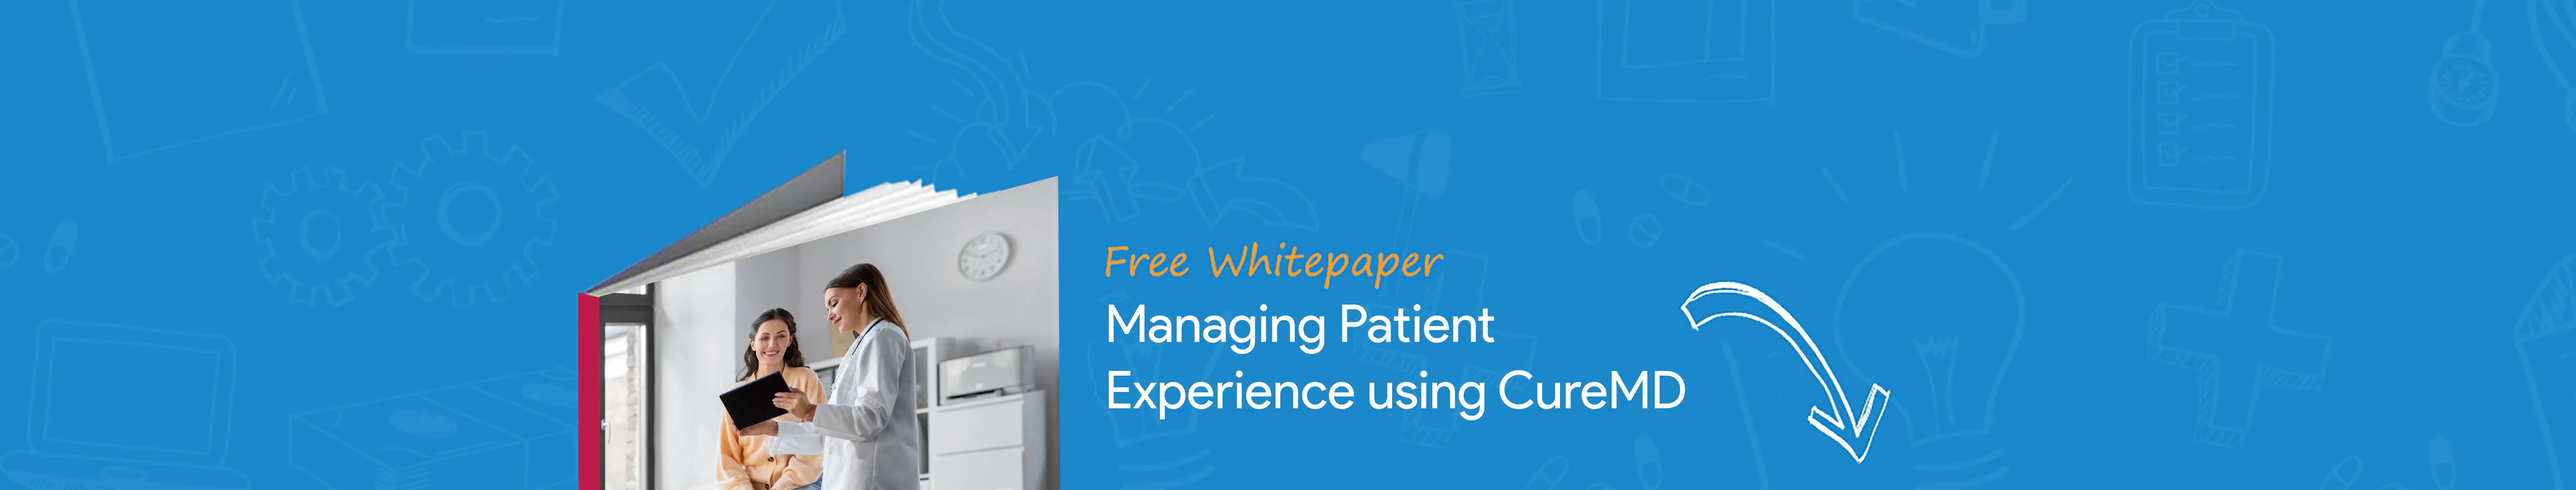 Managing Patient Experience using CureMD banner